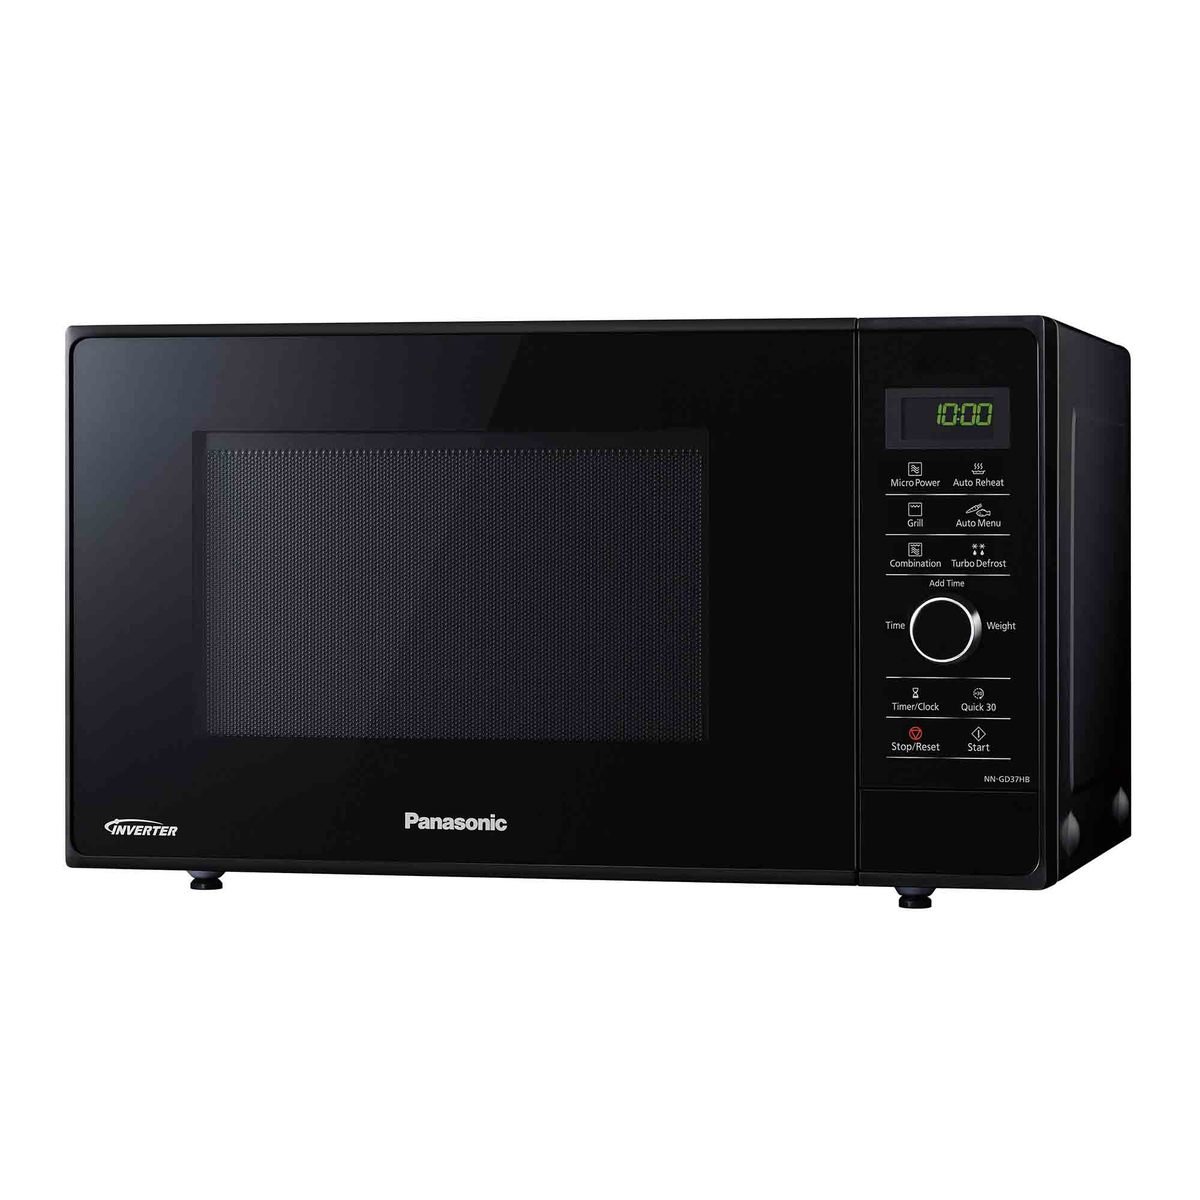 Panasonic Microwave Oven with Grill NNGD37H 23Ltr